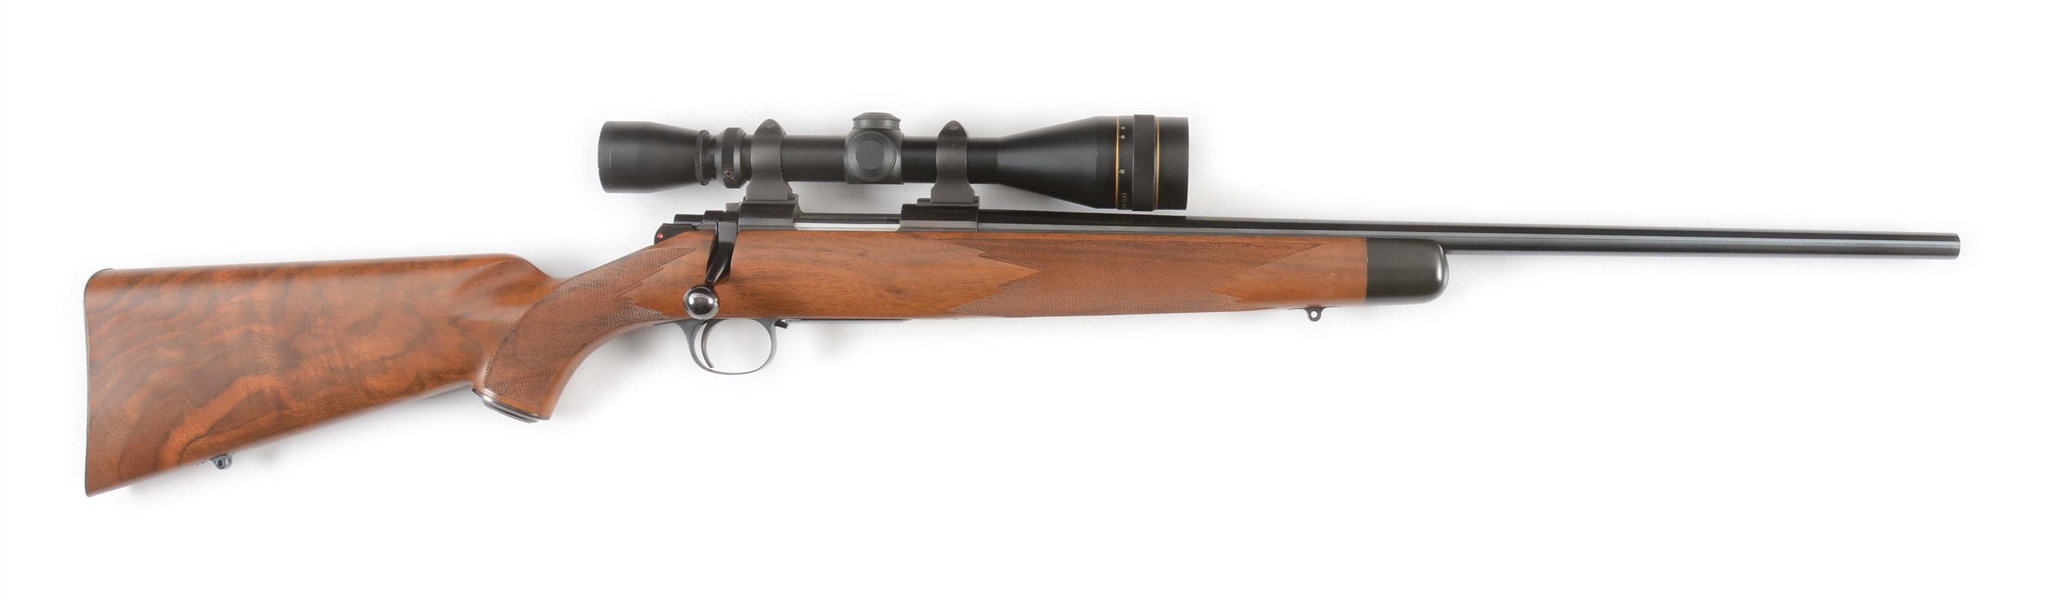 (M) KIMBER 84 .223 BOLT ACTION RIFLE WITH SCOPE.